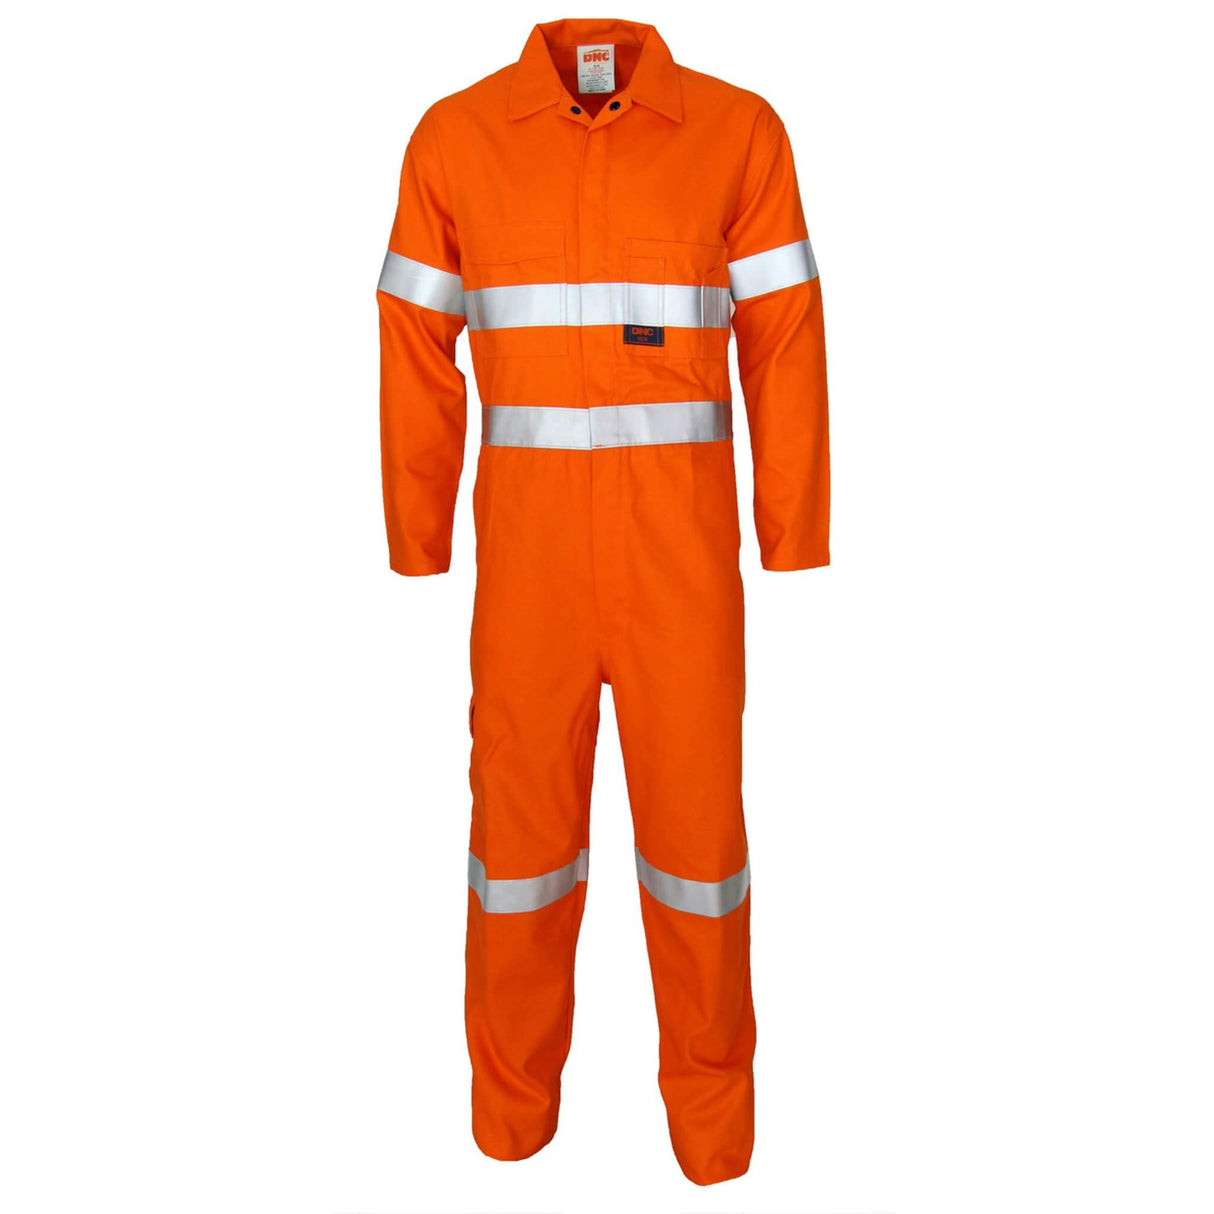 3427 Patron Saint Flame Retardant ARC Rated Coverall with Loxy F/R Tape